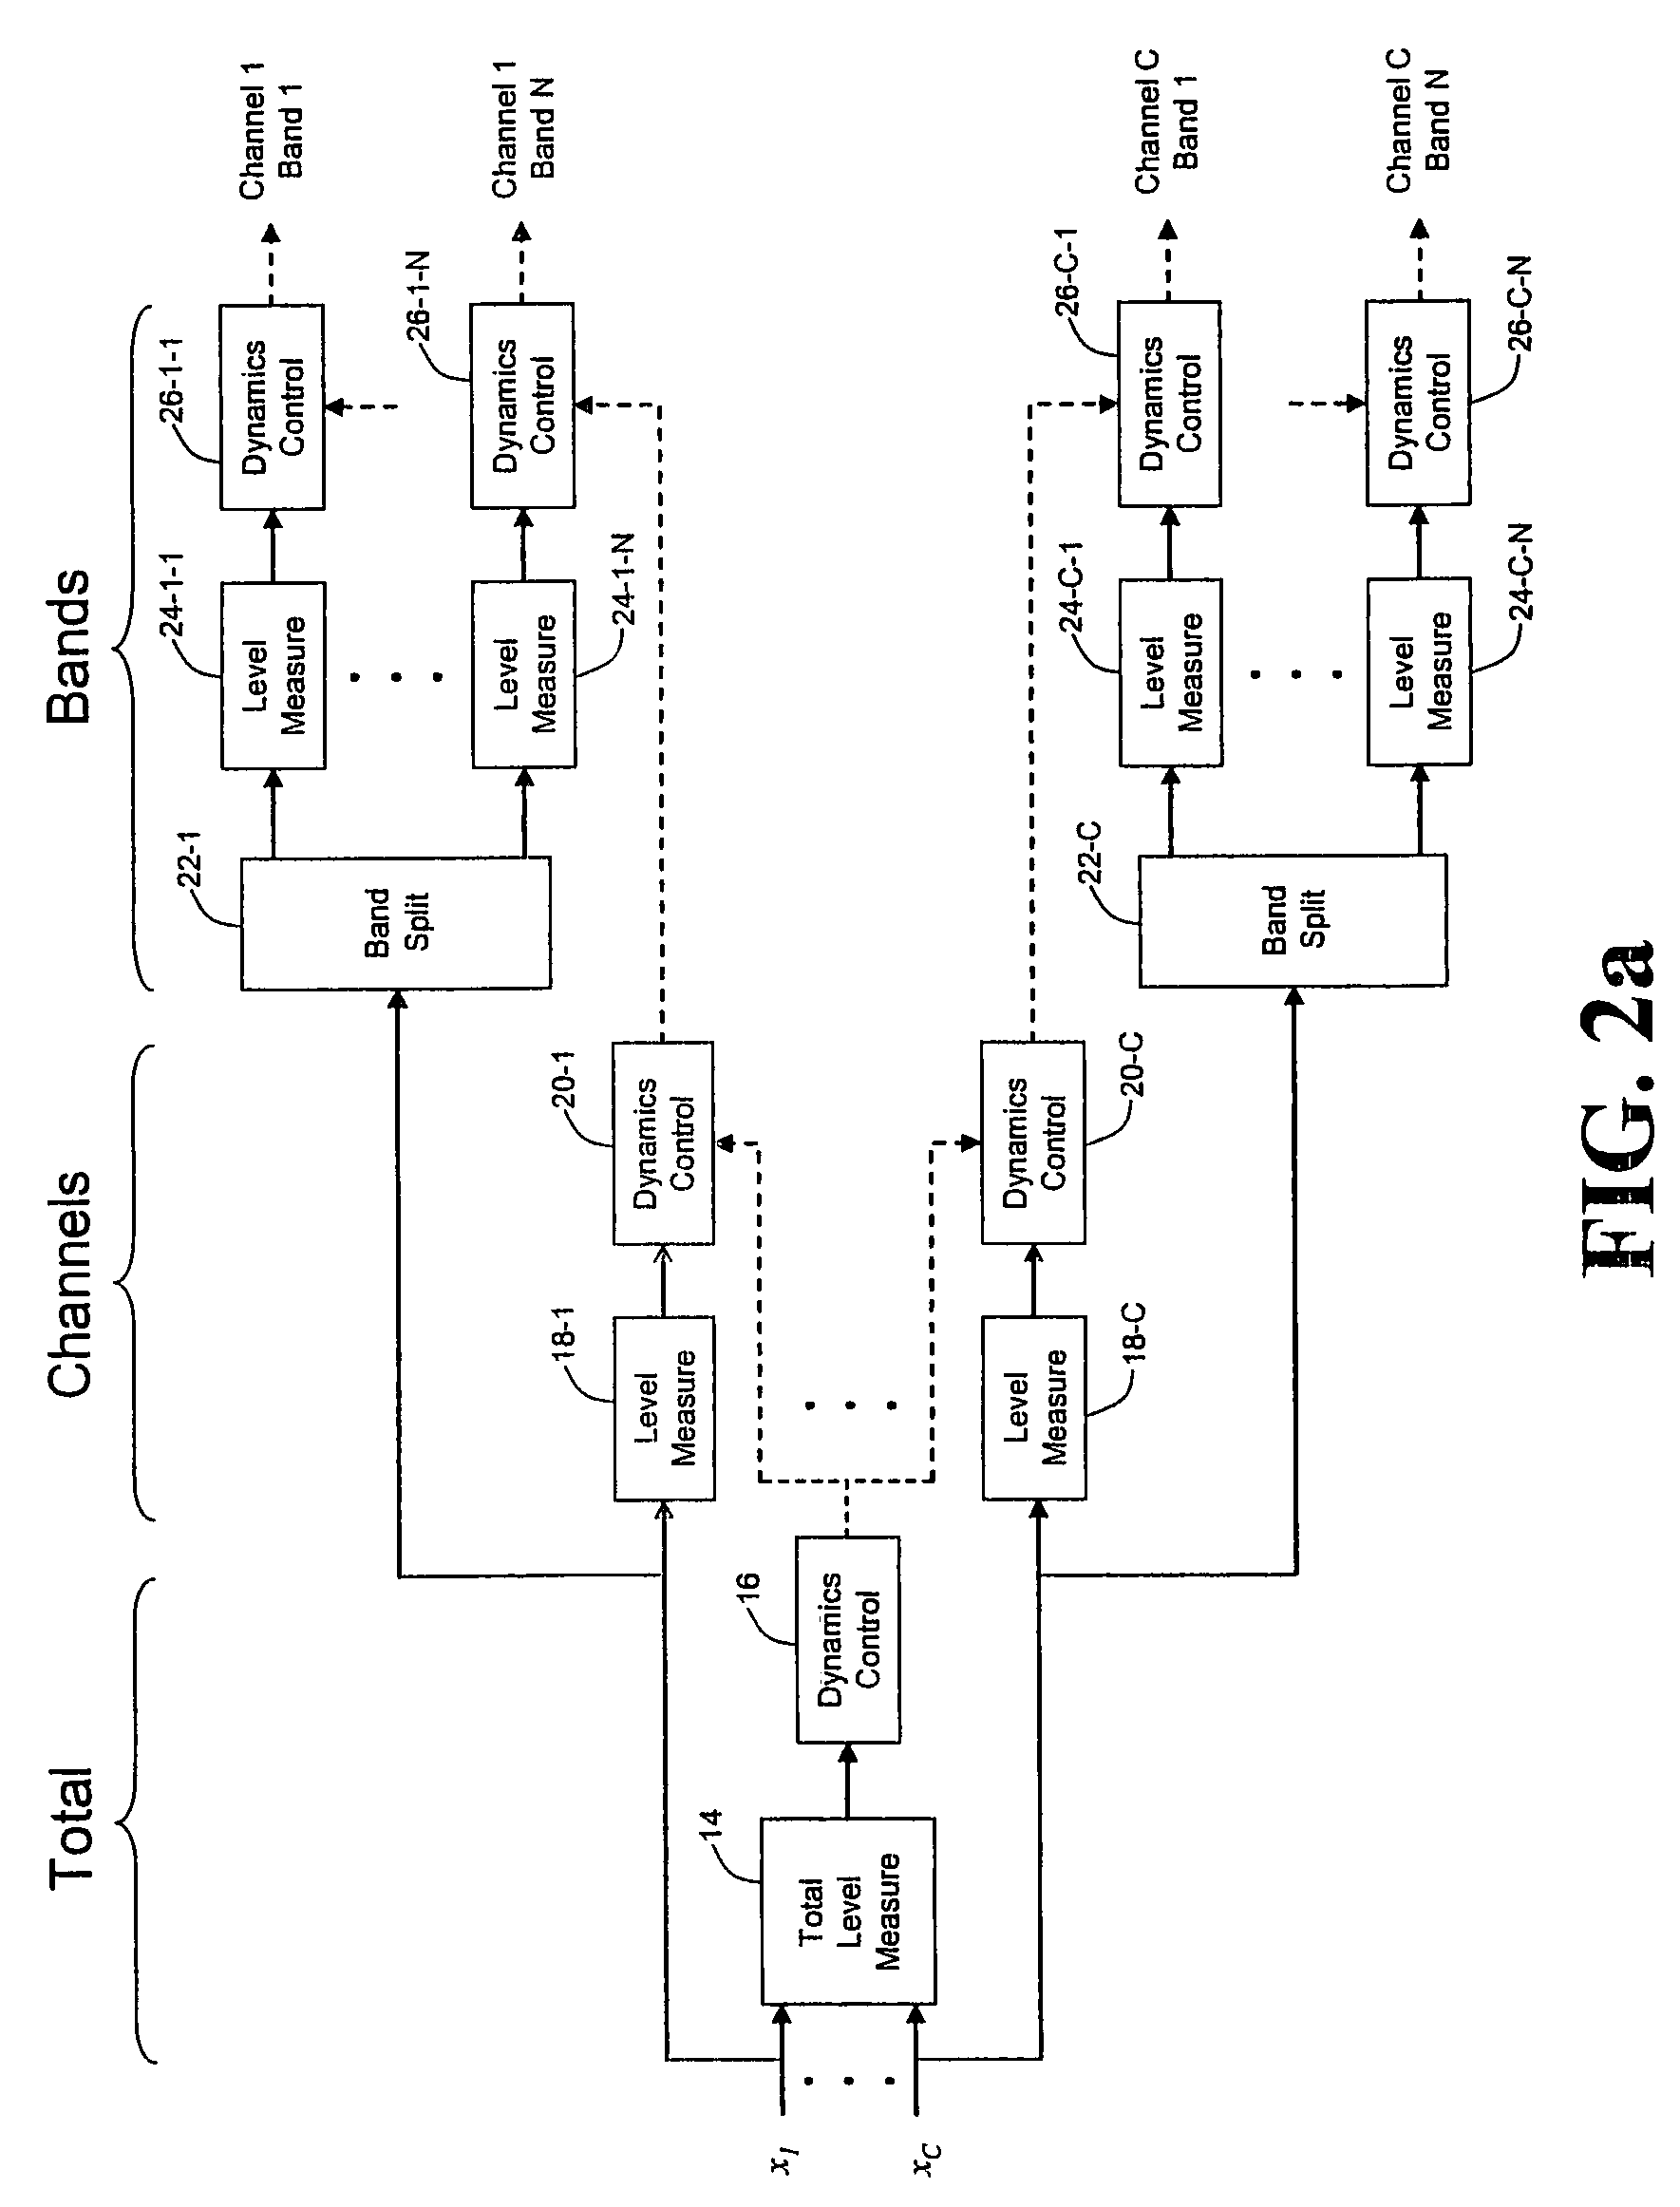 Hierarchical control path with constraints for audio dynamics processing